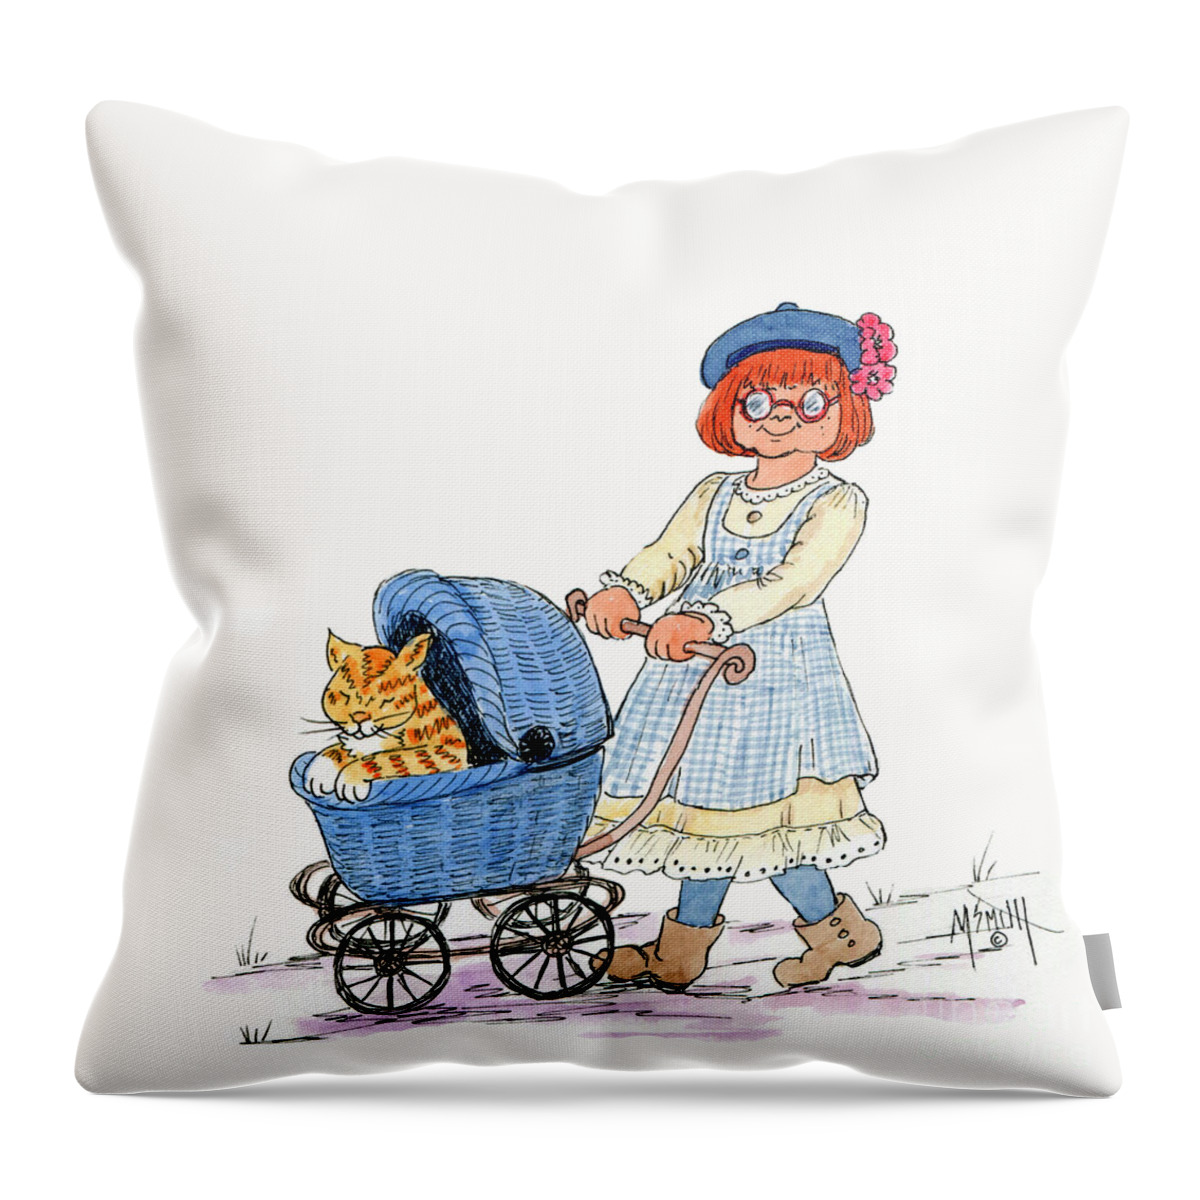 Children's Art Throw Pillow featuring the drawing Sofie's Doll Carriage by Marilyn Smith